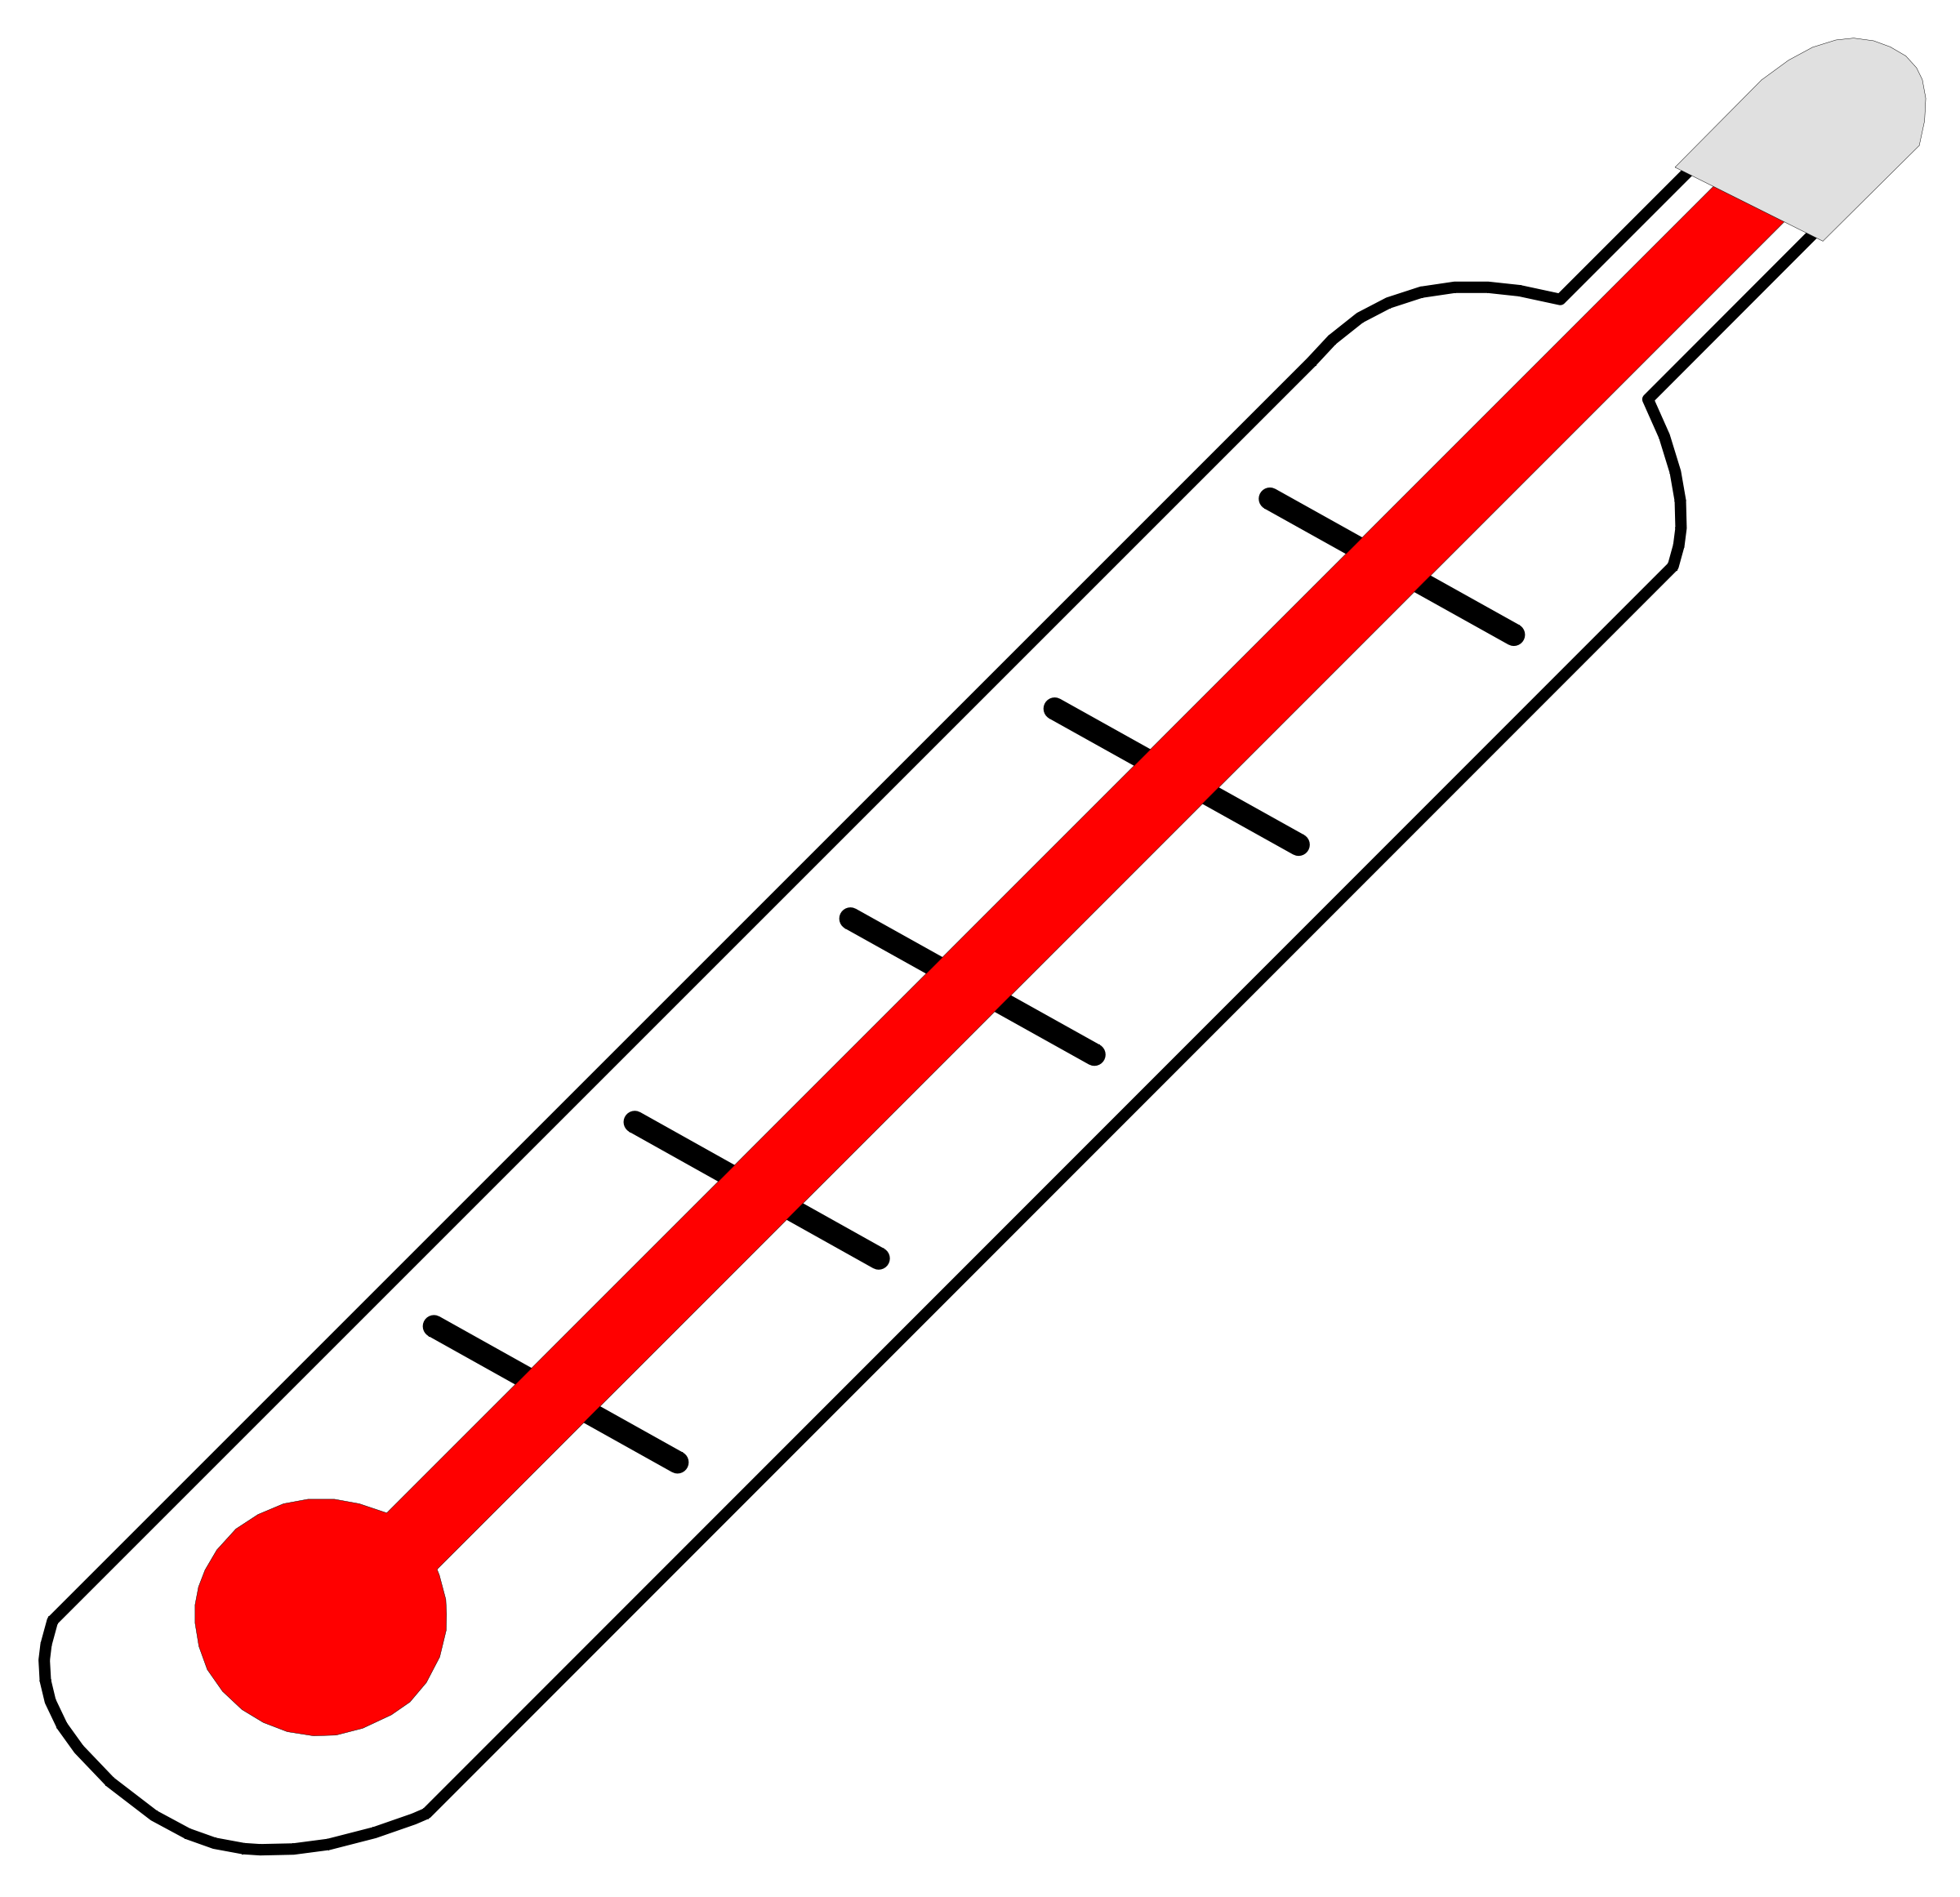 Fundraising thermometer clip art free clipart images